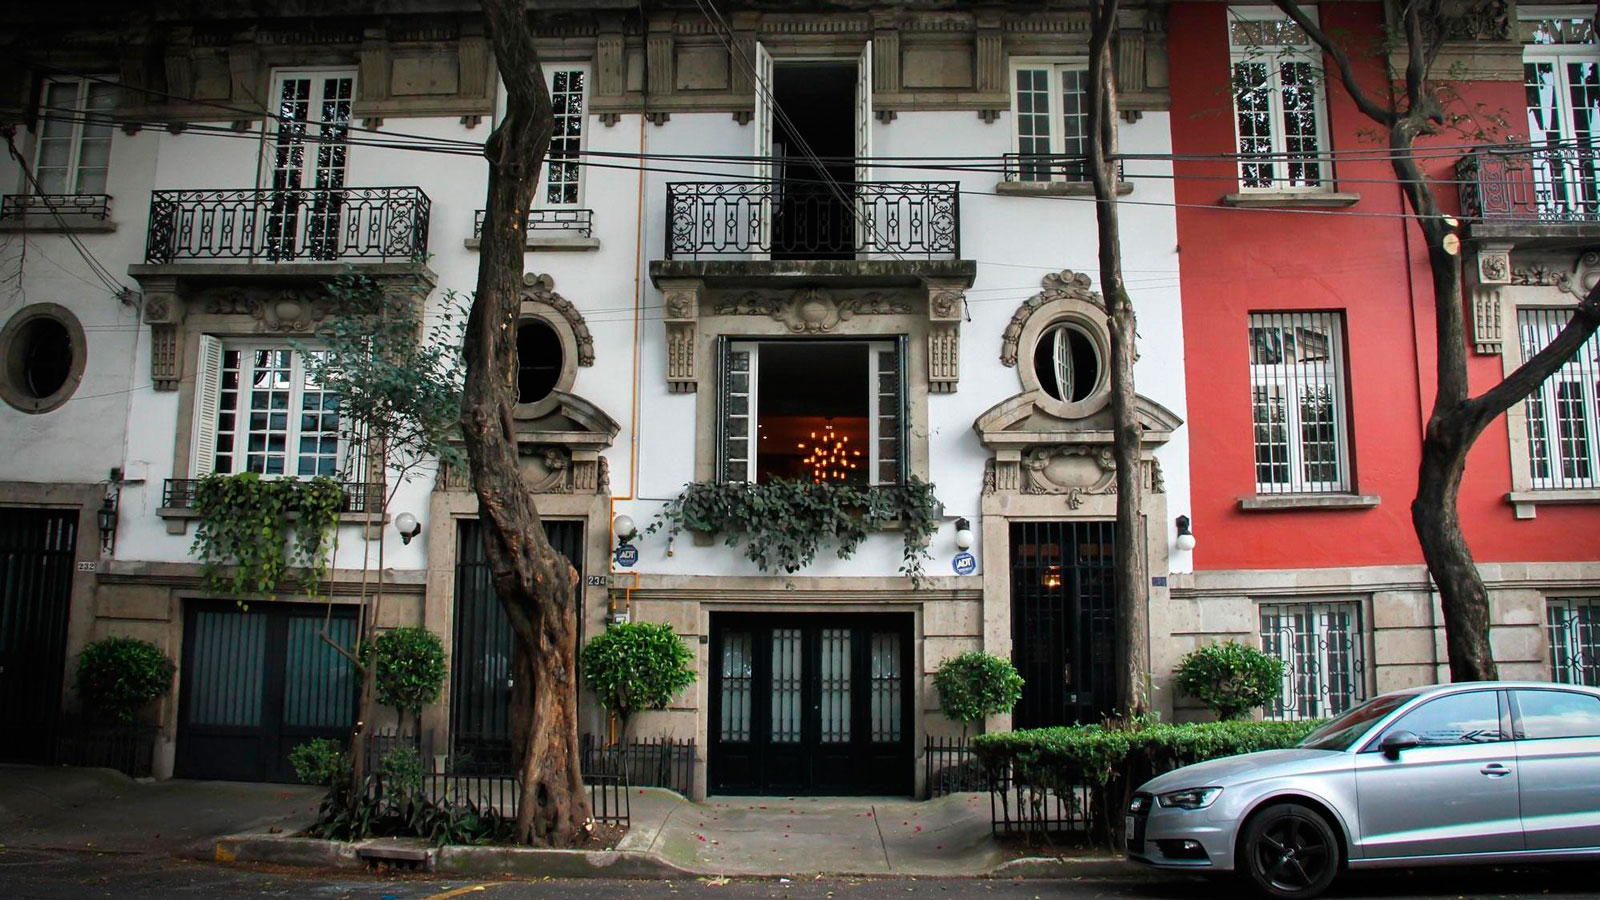 Monocle Travel Guide: Mexico City - Nima Local House Hotel